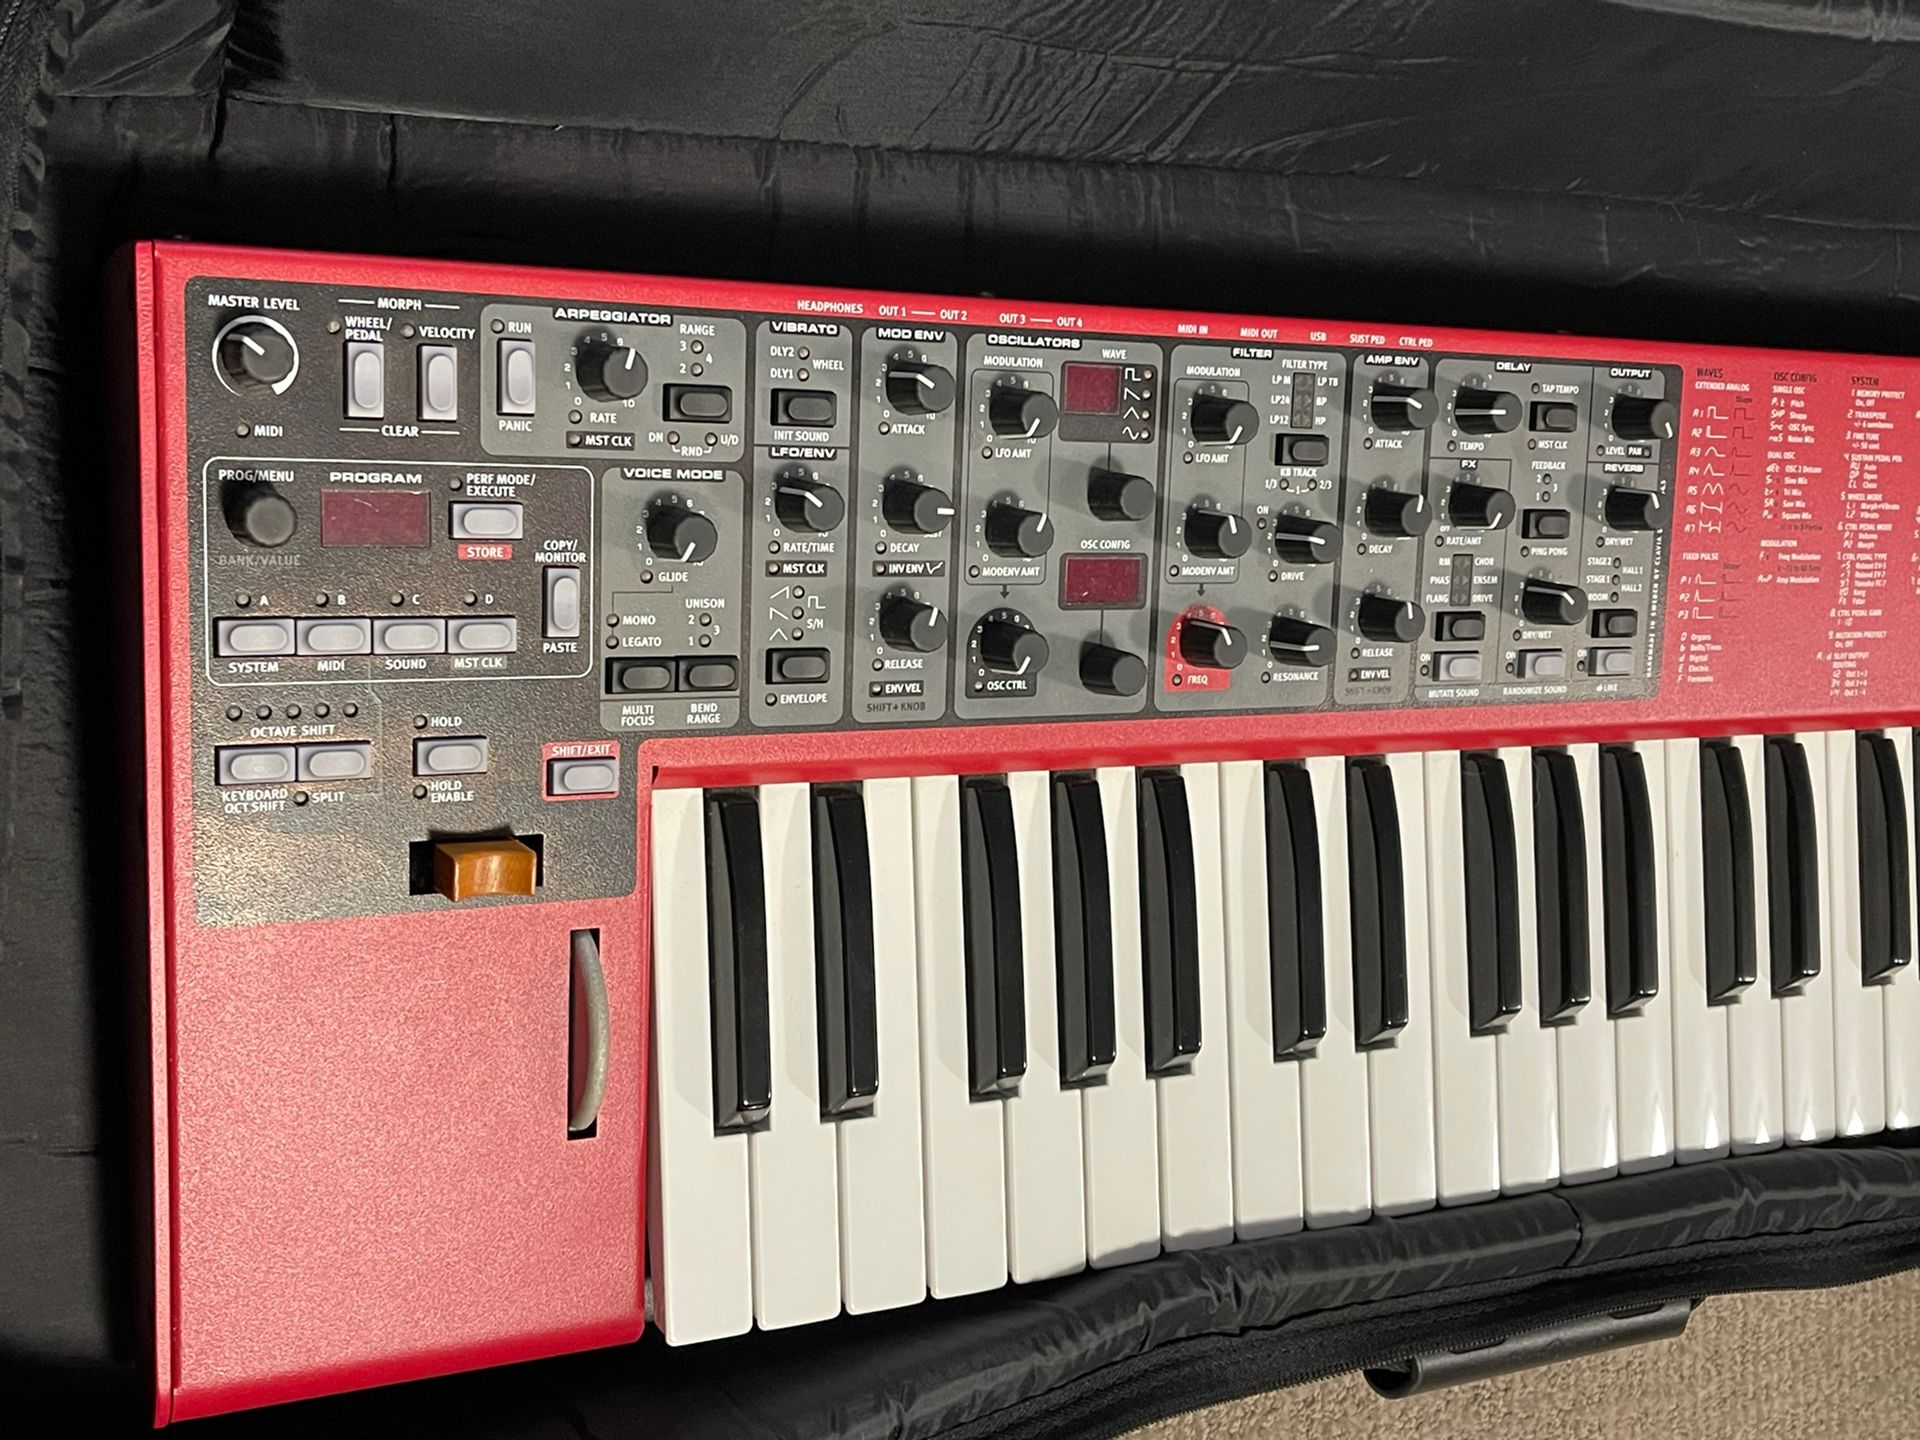 Nord Lead A1 Synthesizer